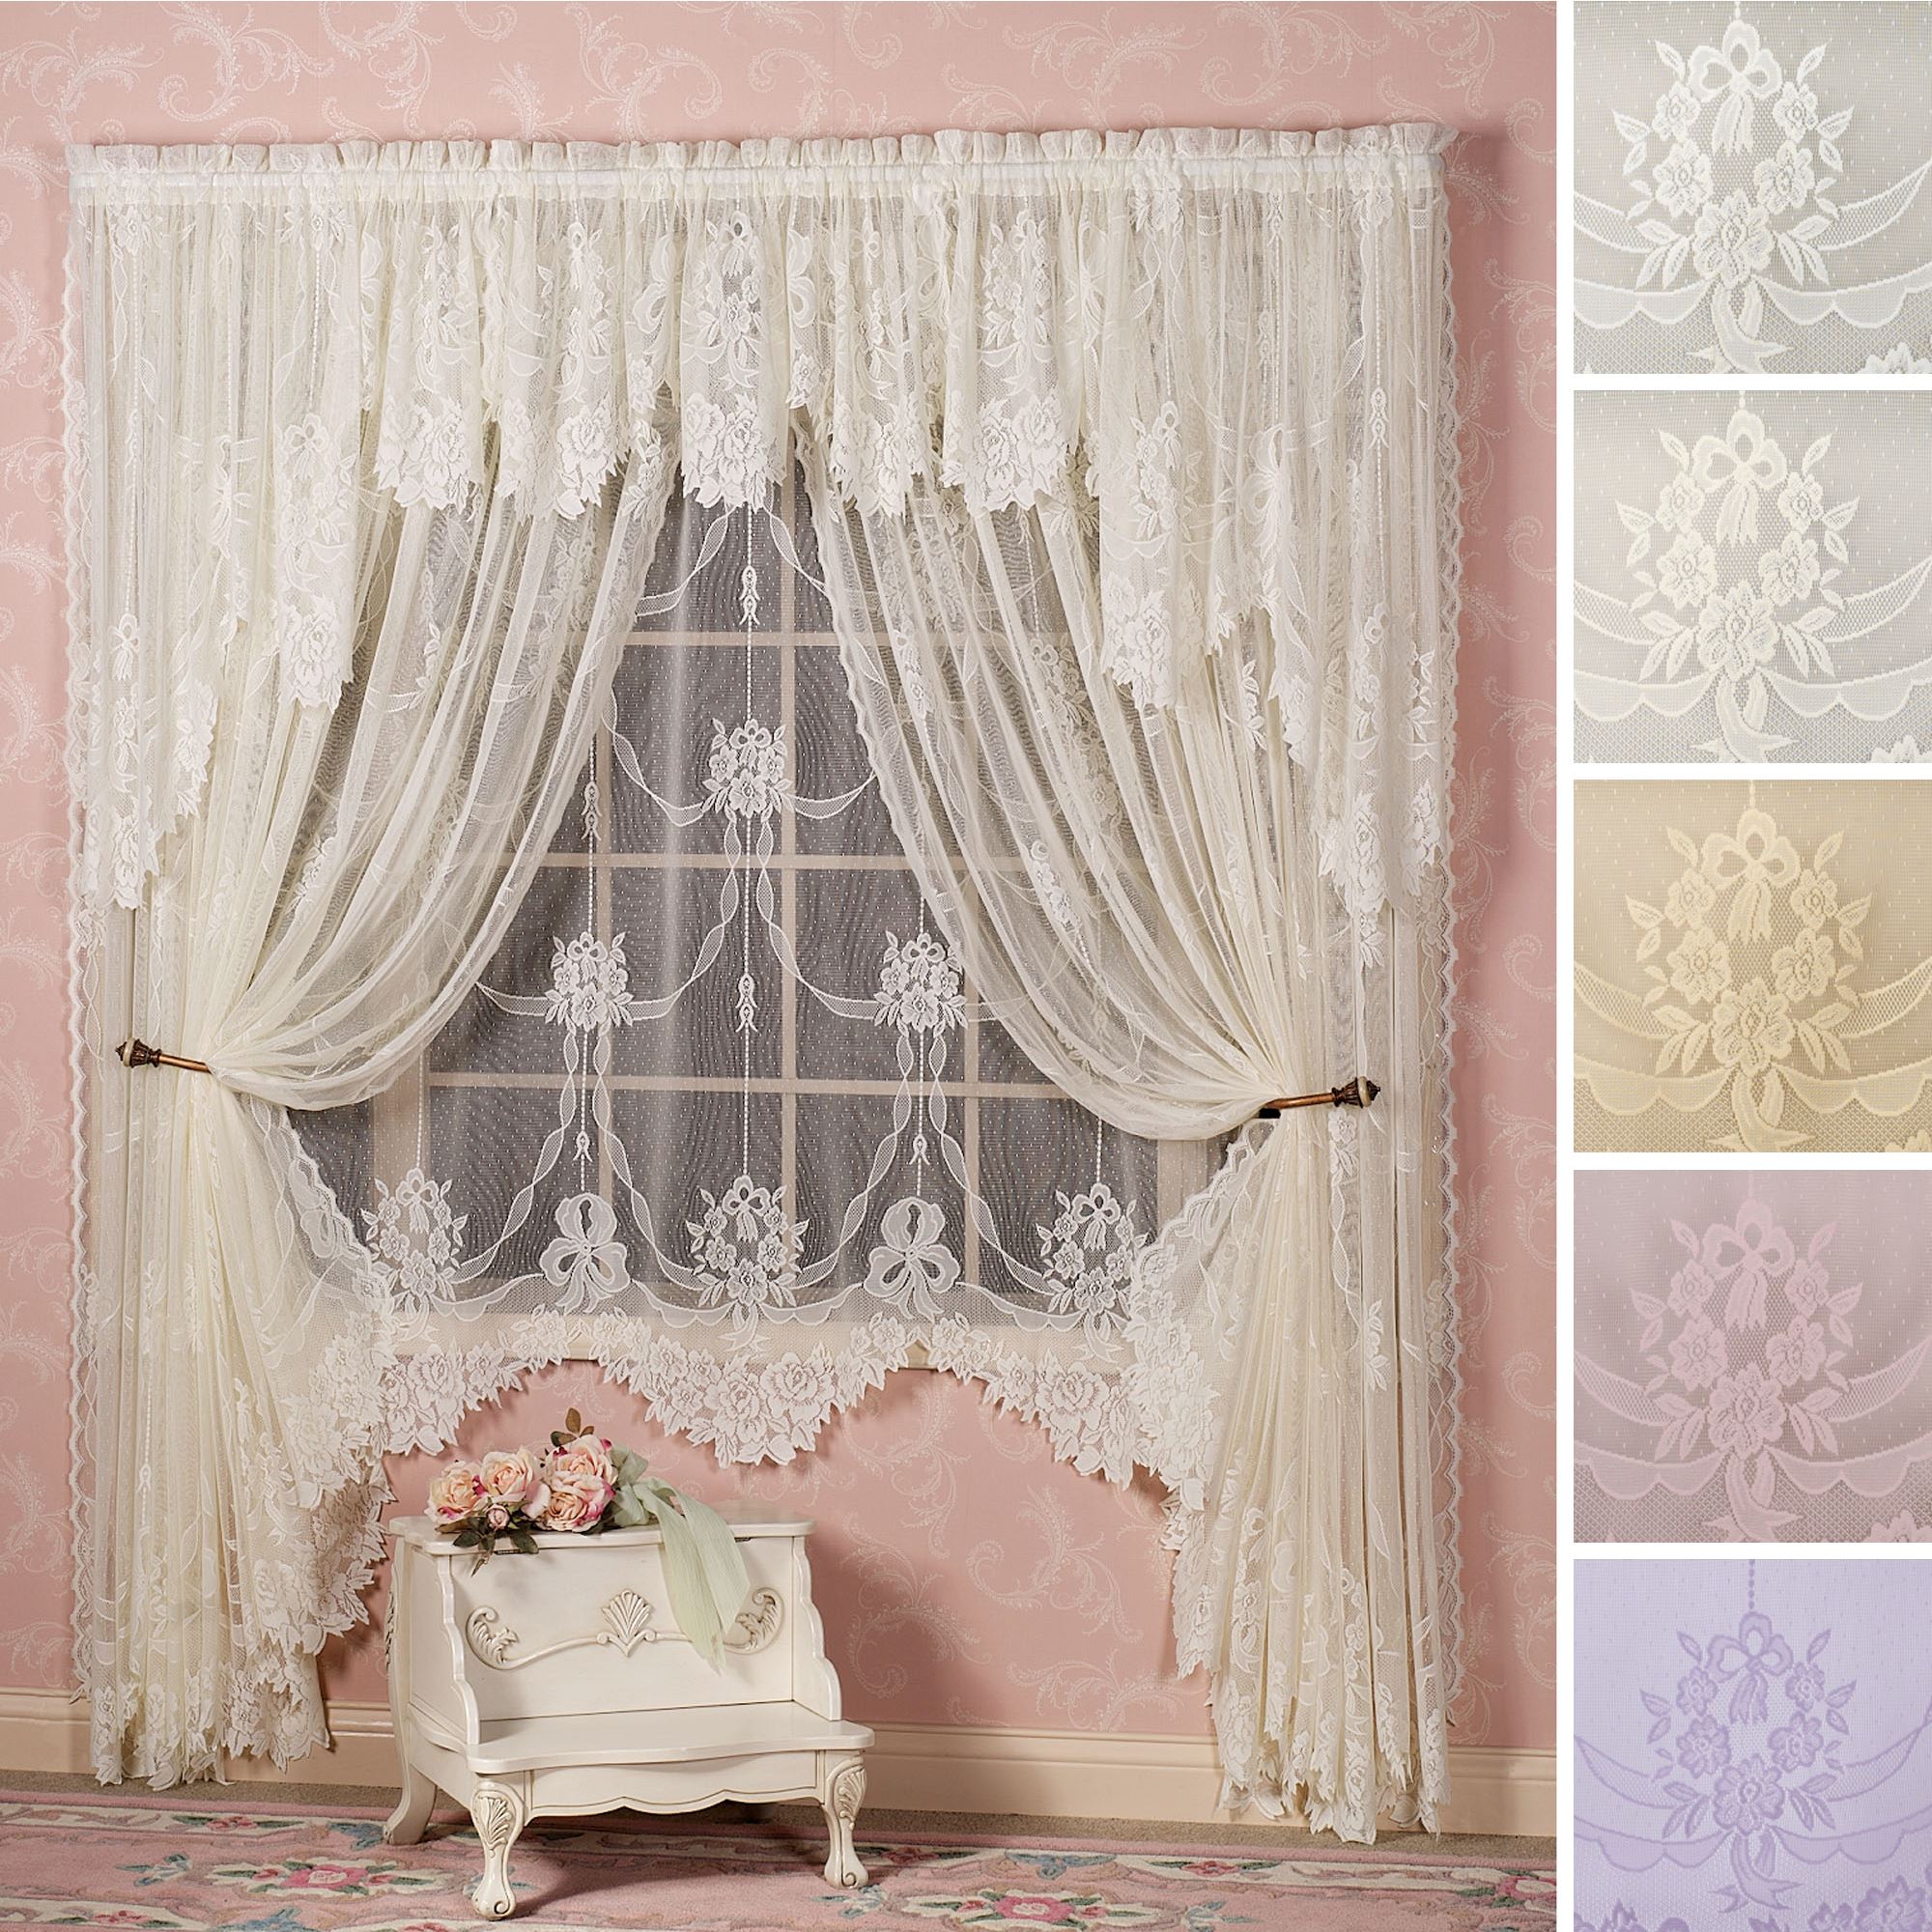 Exquisite Lace Curtains for Your Vintage Home Interior – goodworksfurniture